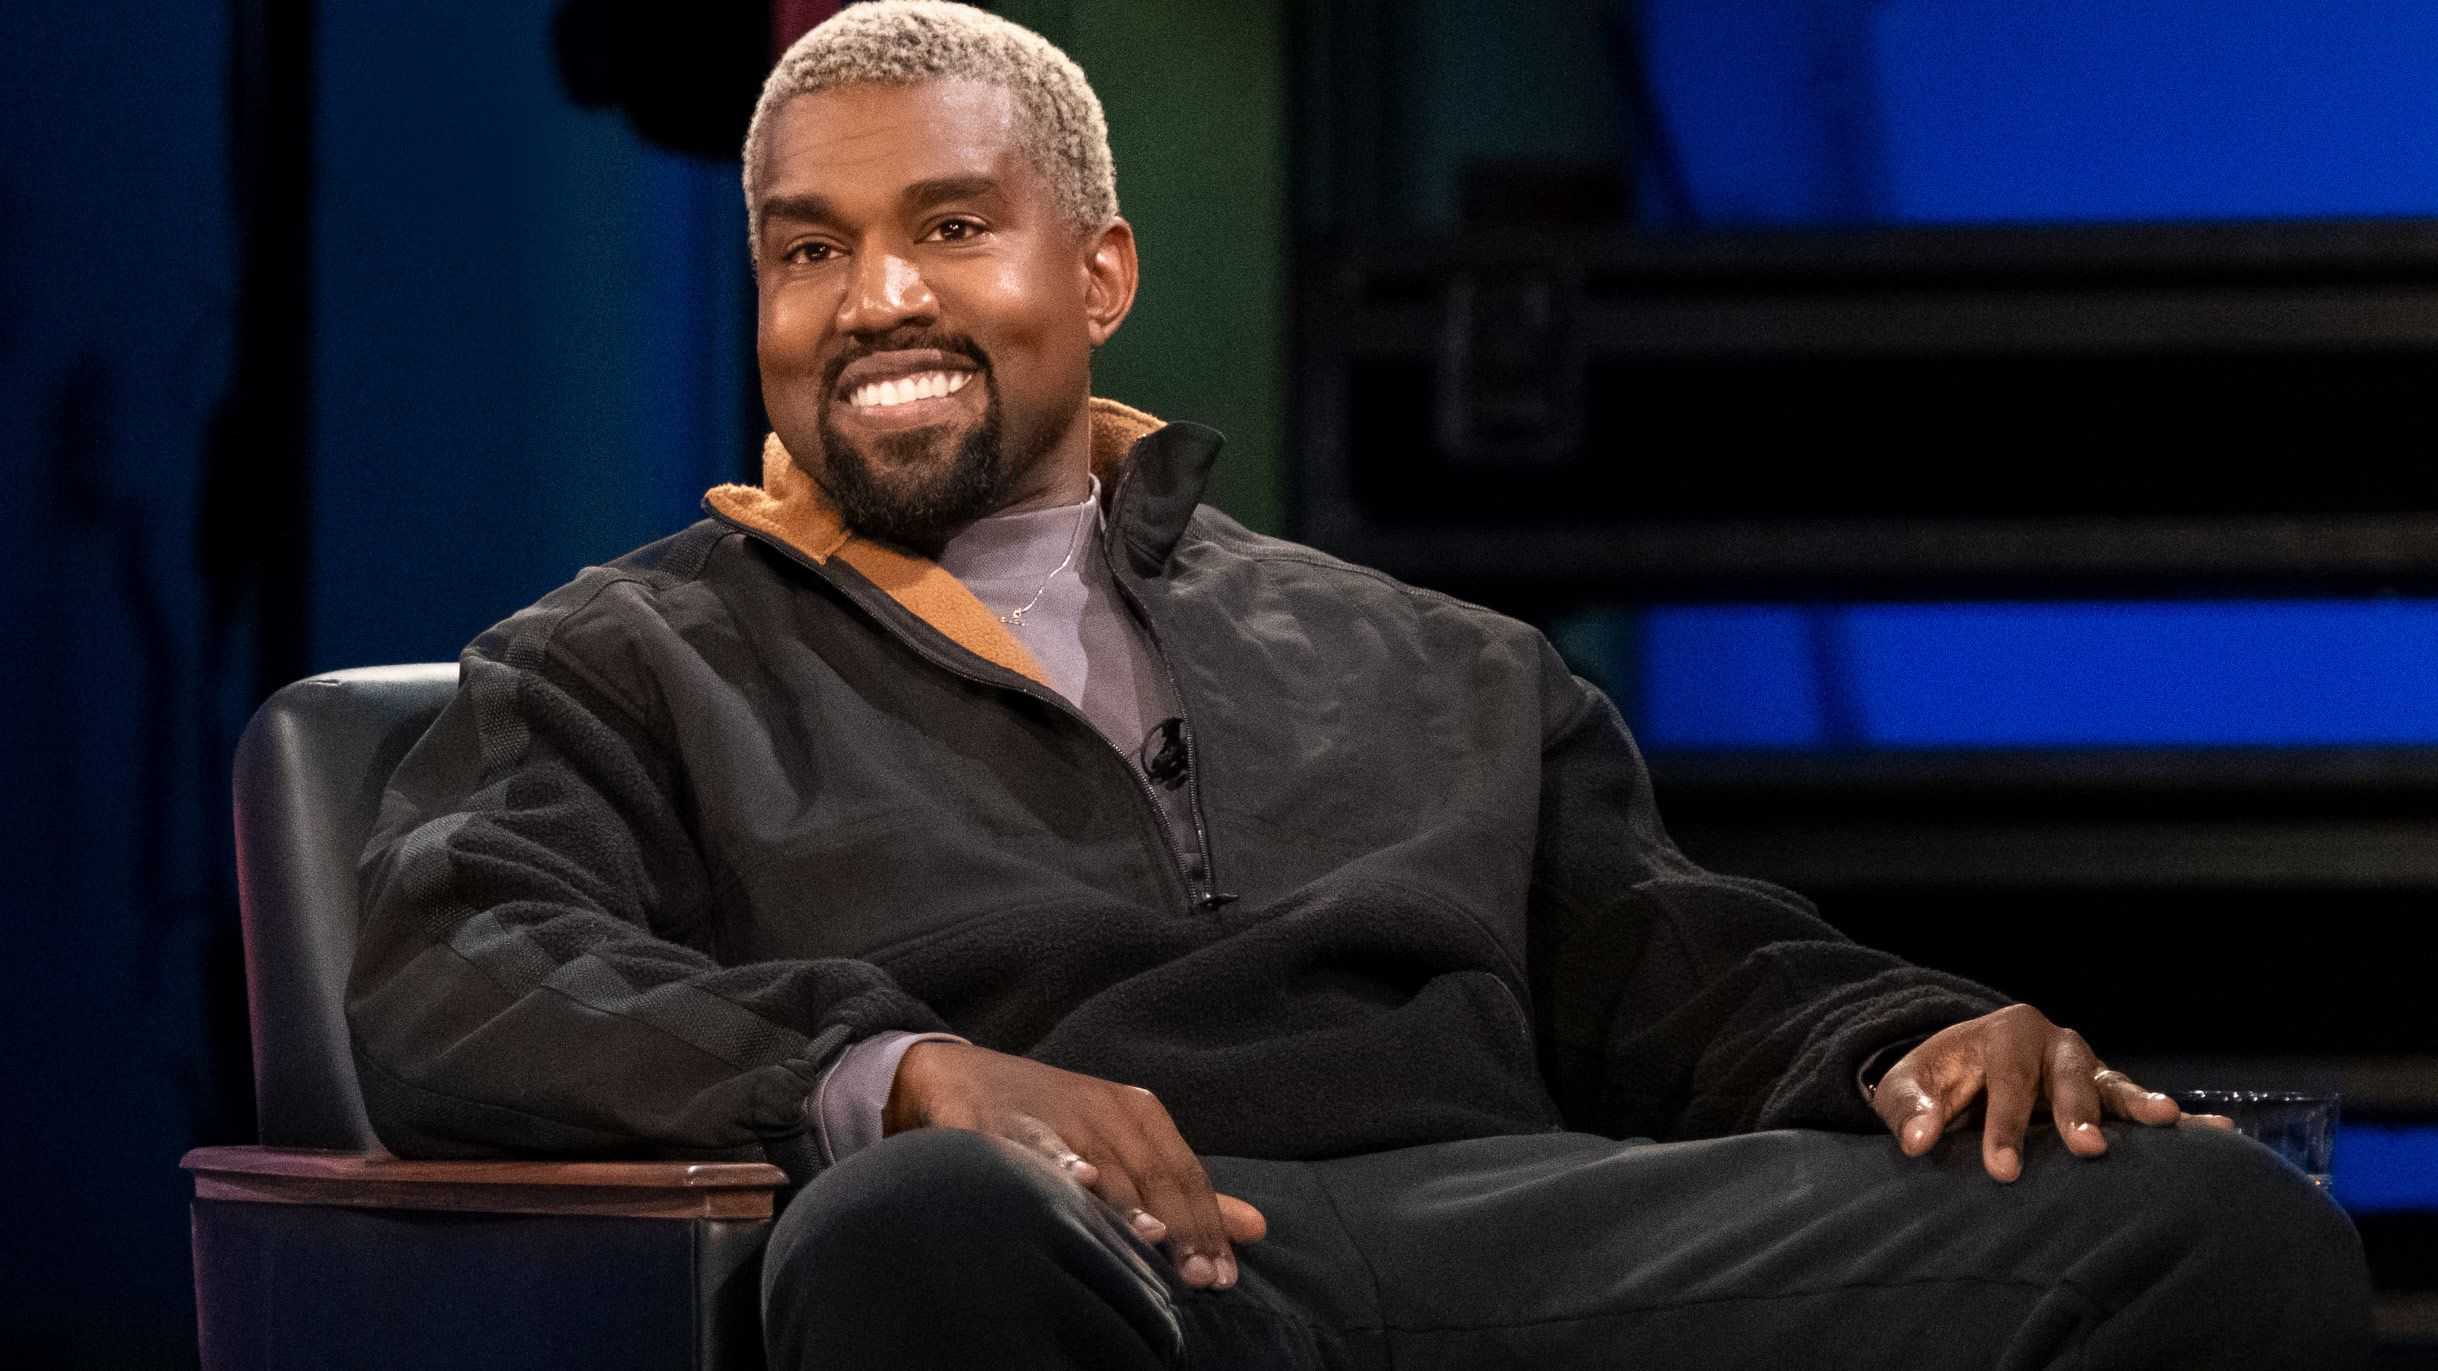 How Kanye West's statements lost him millions and major deals